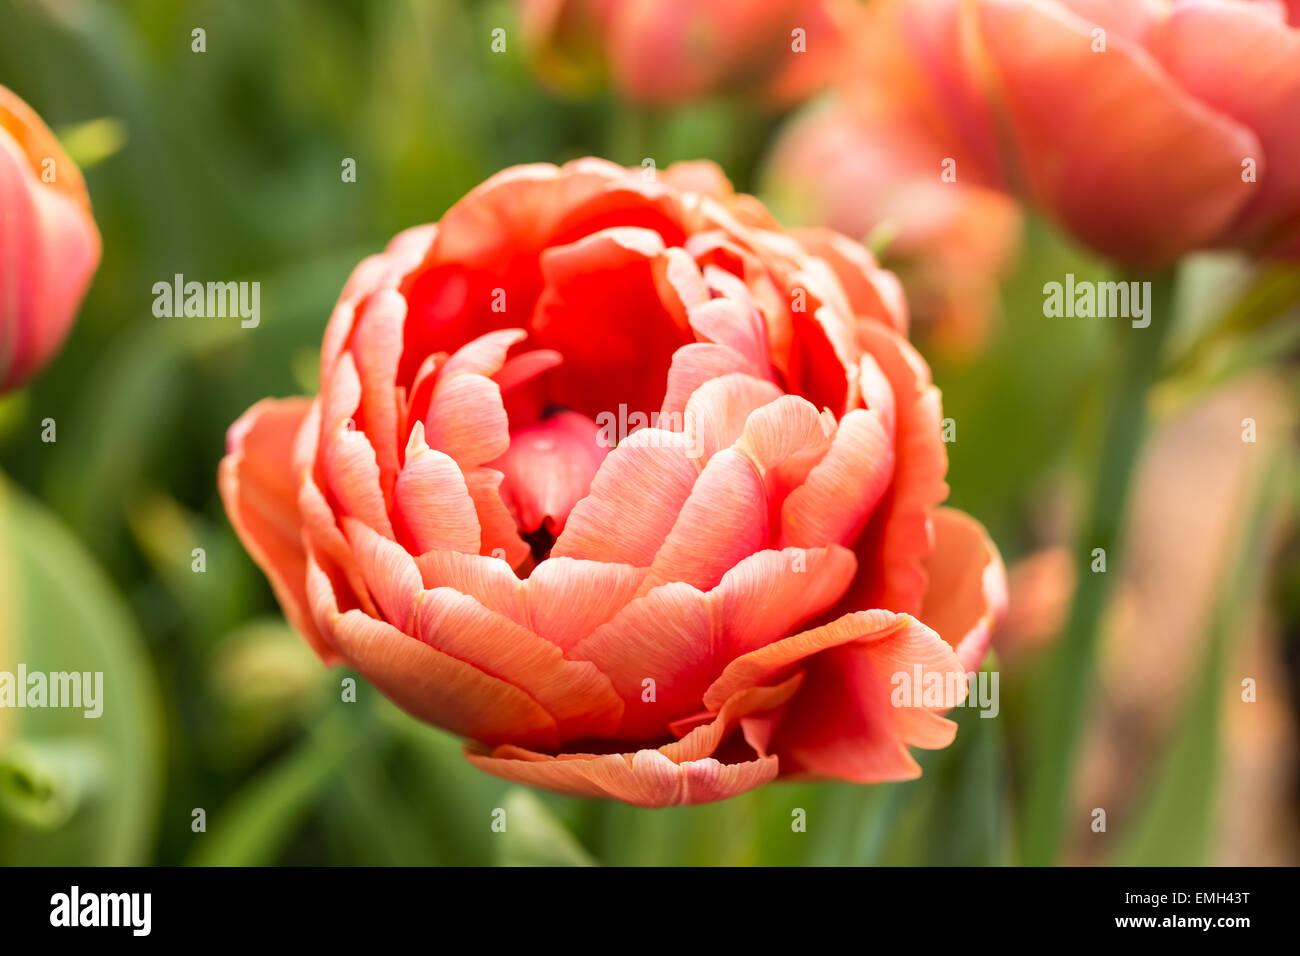 Close up of Pink tulips in the spring garden. Shallow DOF. Stock Photo